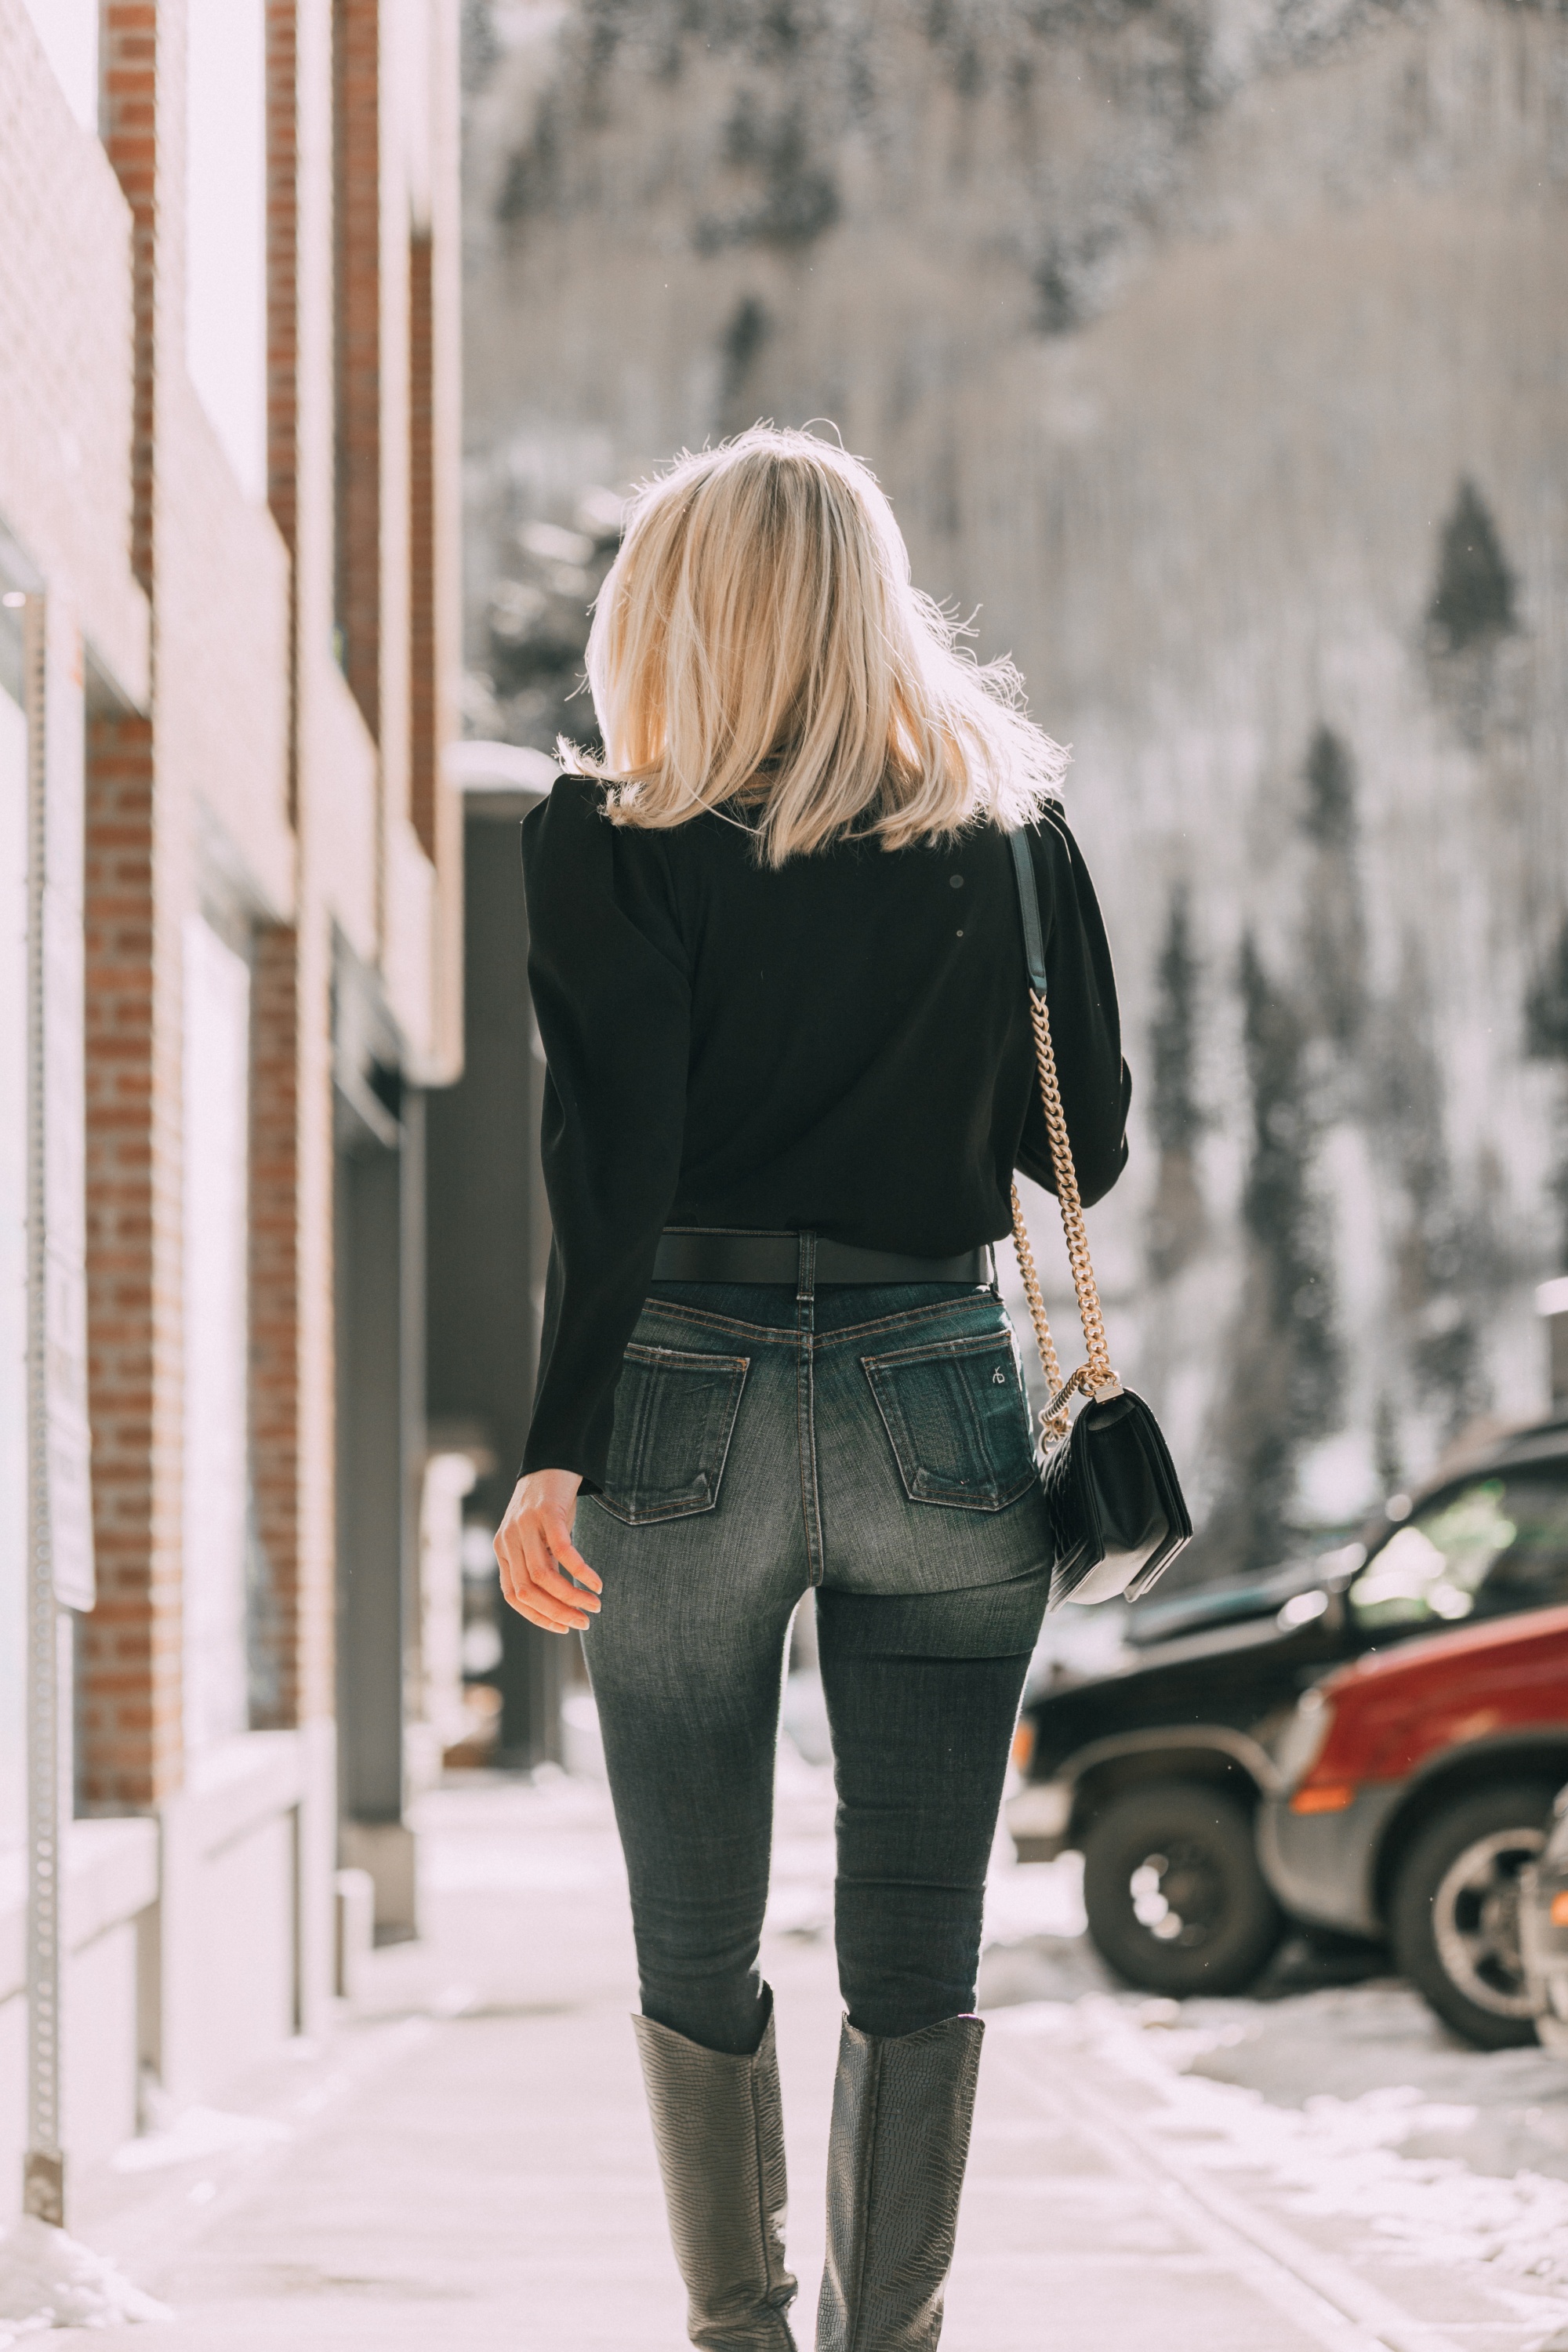 Date Night Outfits, Fashion blogger Erin Busbee of BusbeeStyle.com wearing a black puff sleeve blouse by IRO, ripped skinny jeans by Rag & Bone, Schutz black croc-embossed knee high boots, Chanel boy bag, and Topshop belt in Telluride, Colorado